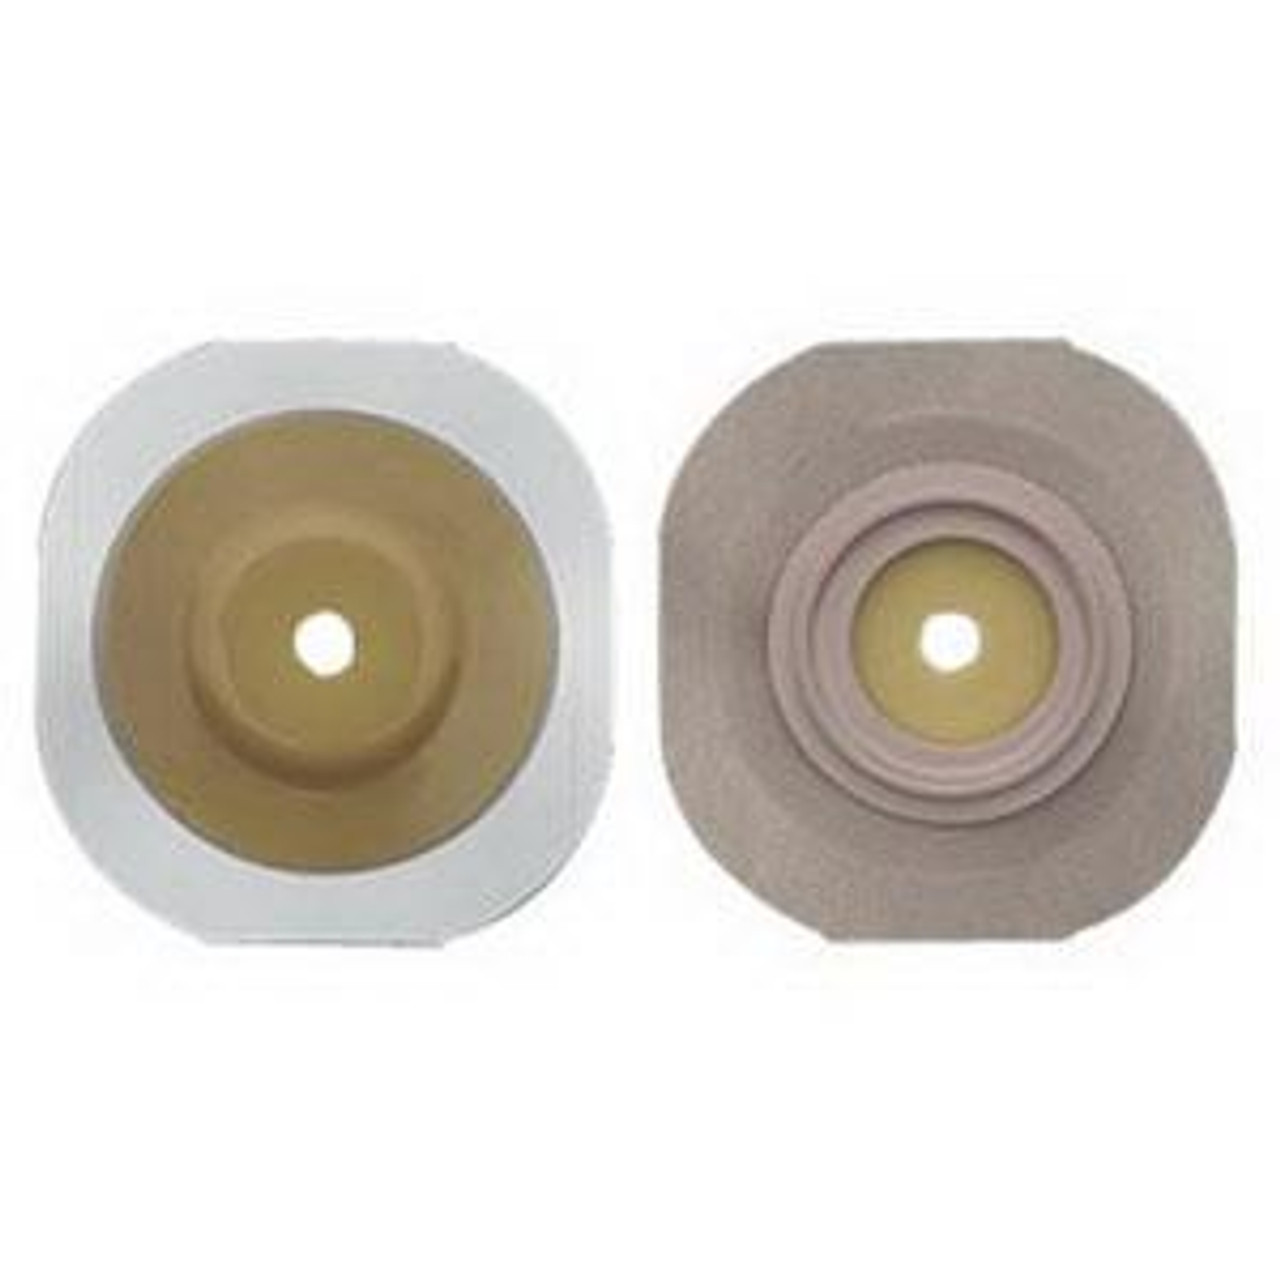 FLEXWEAR CONVEX CUT-TO-FIT 1" NEW IMAGE Barrier FLANGE,TAPE BX/5 (HOL-14402) (Hollister 14402)